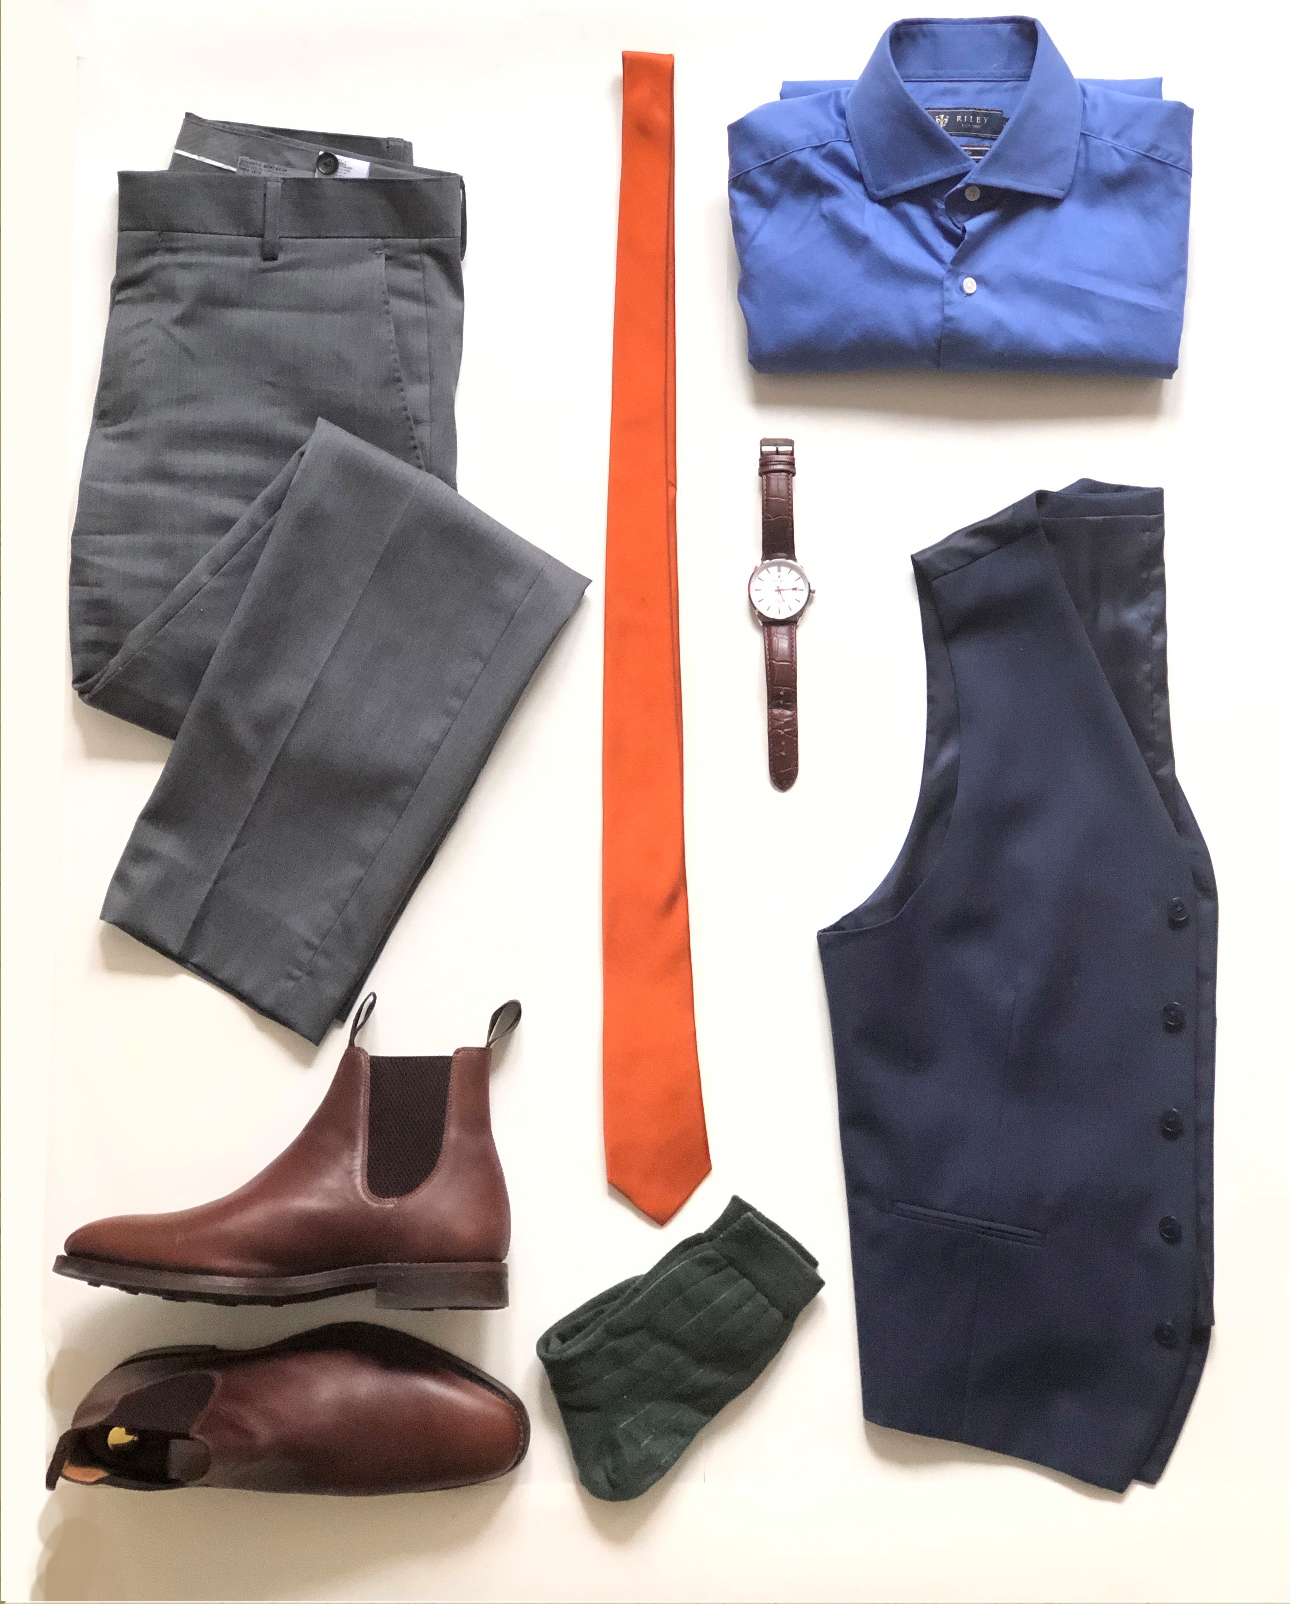 Business Casual Outfits For Men - Misiu Academy